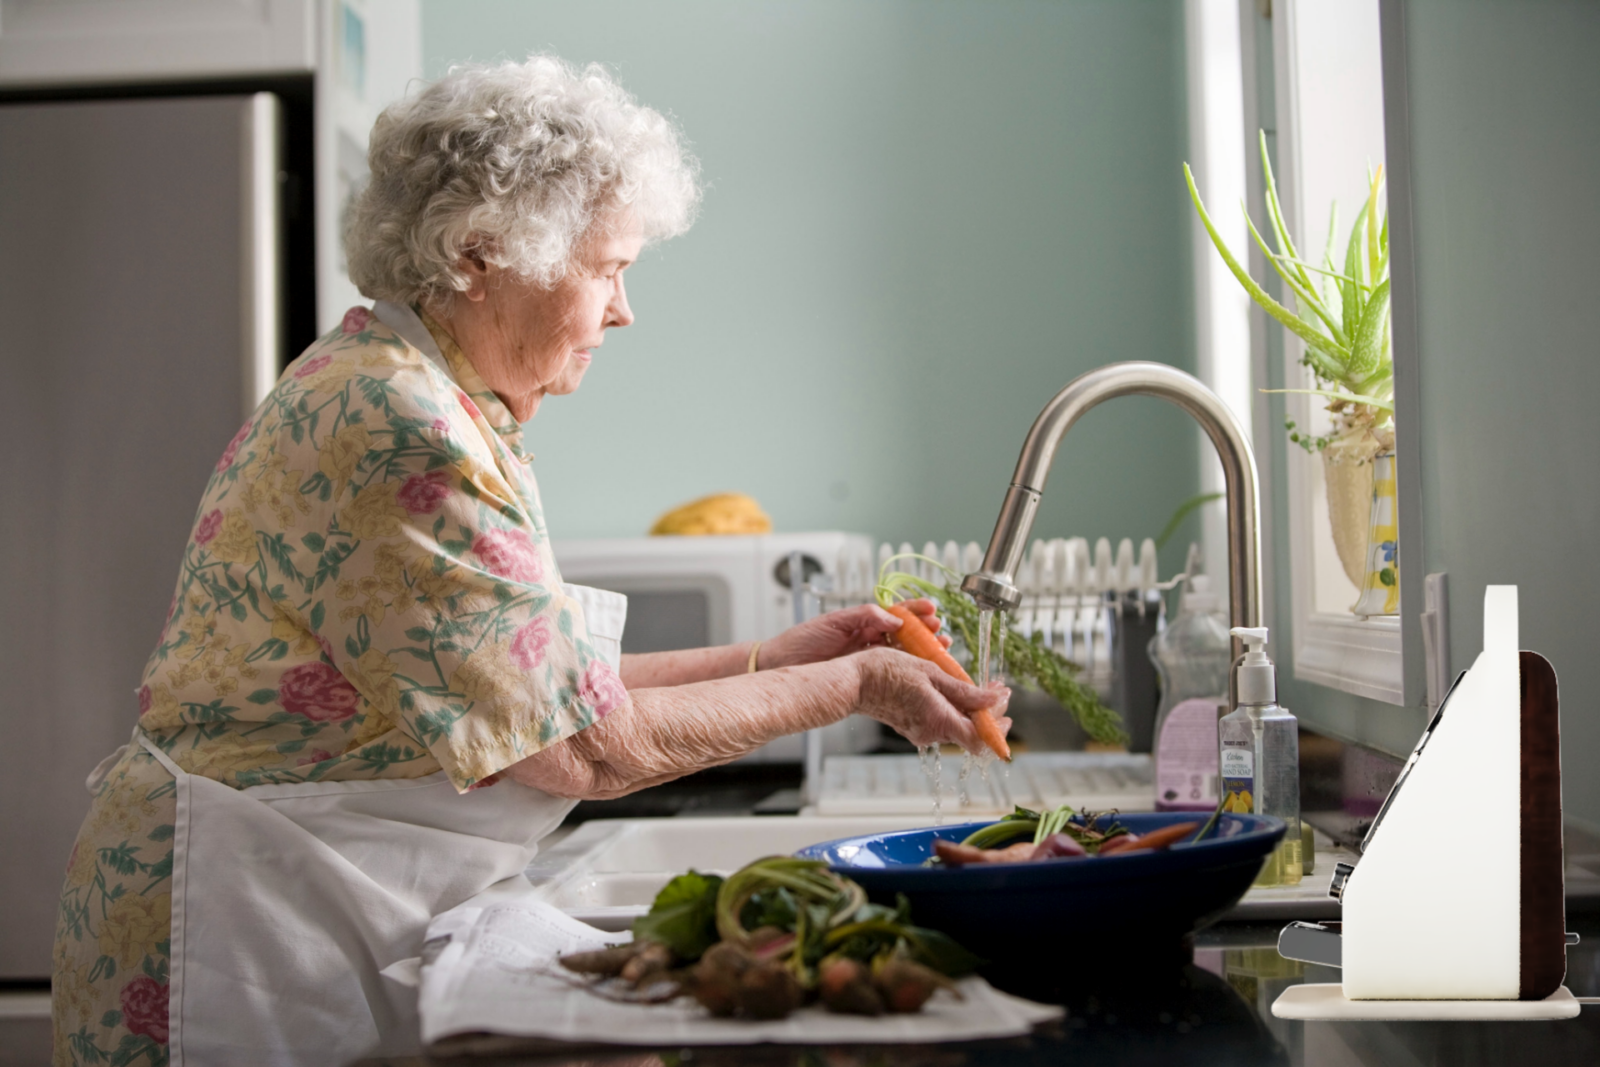 Elderly lady with early onset dementia cooking in the kitchen with her Connect device playing music or playing videos of family etc. 